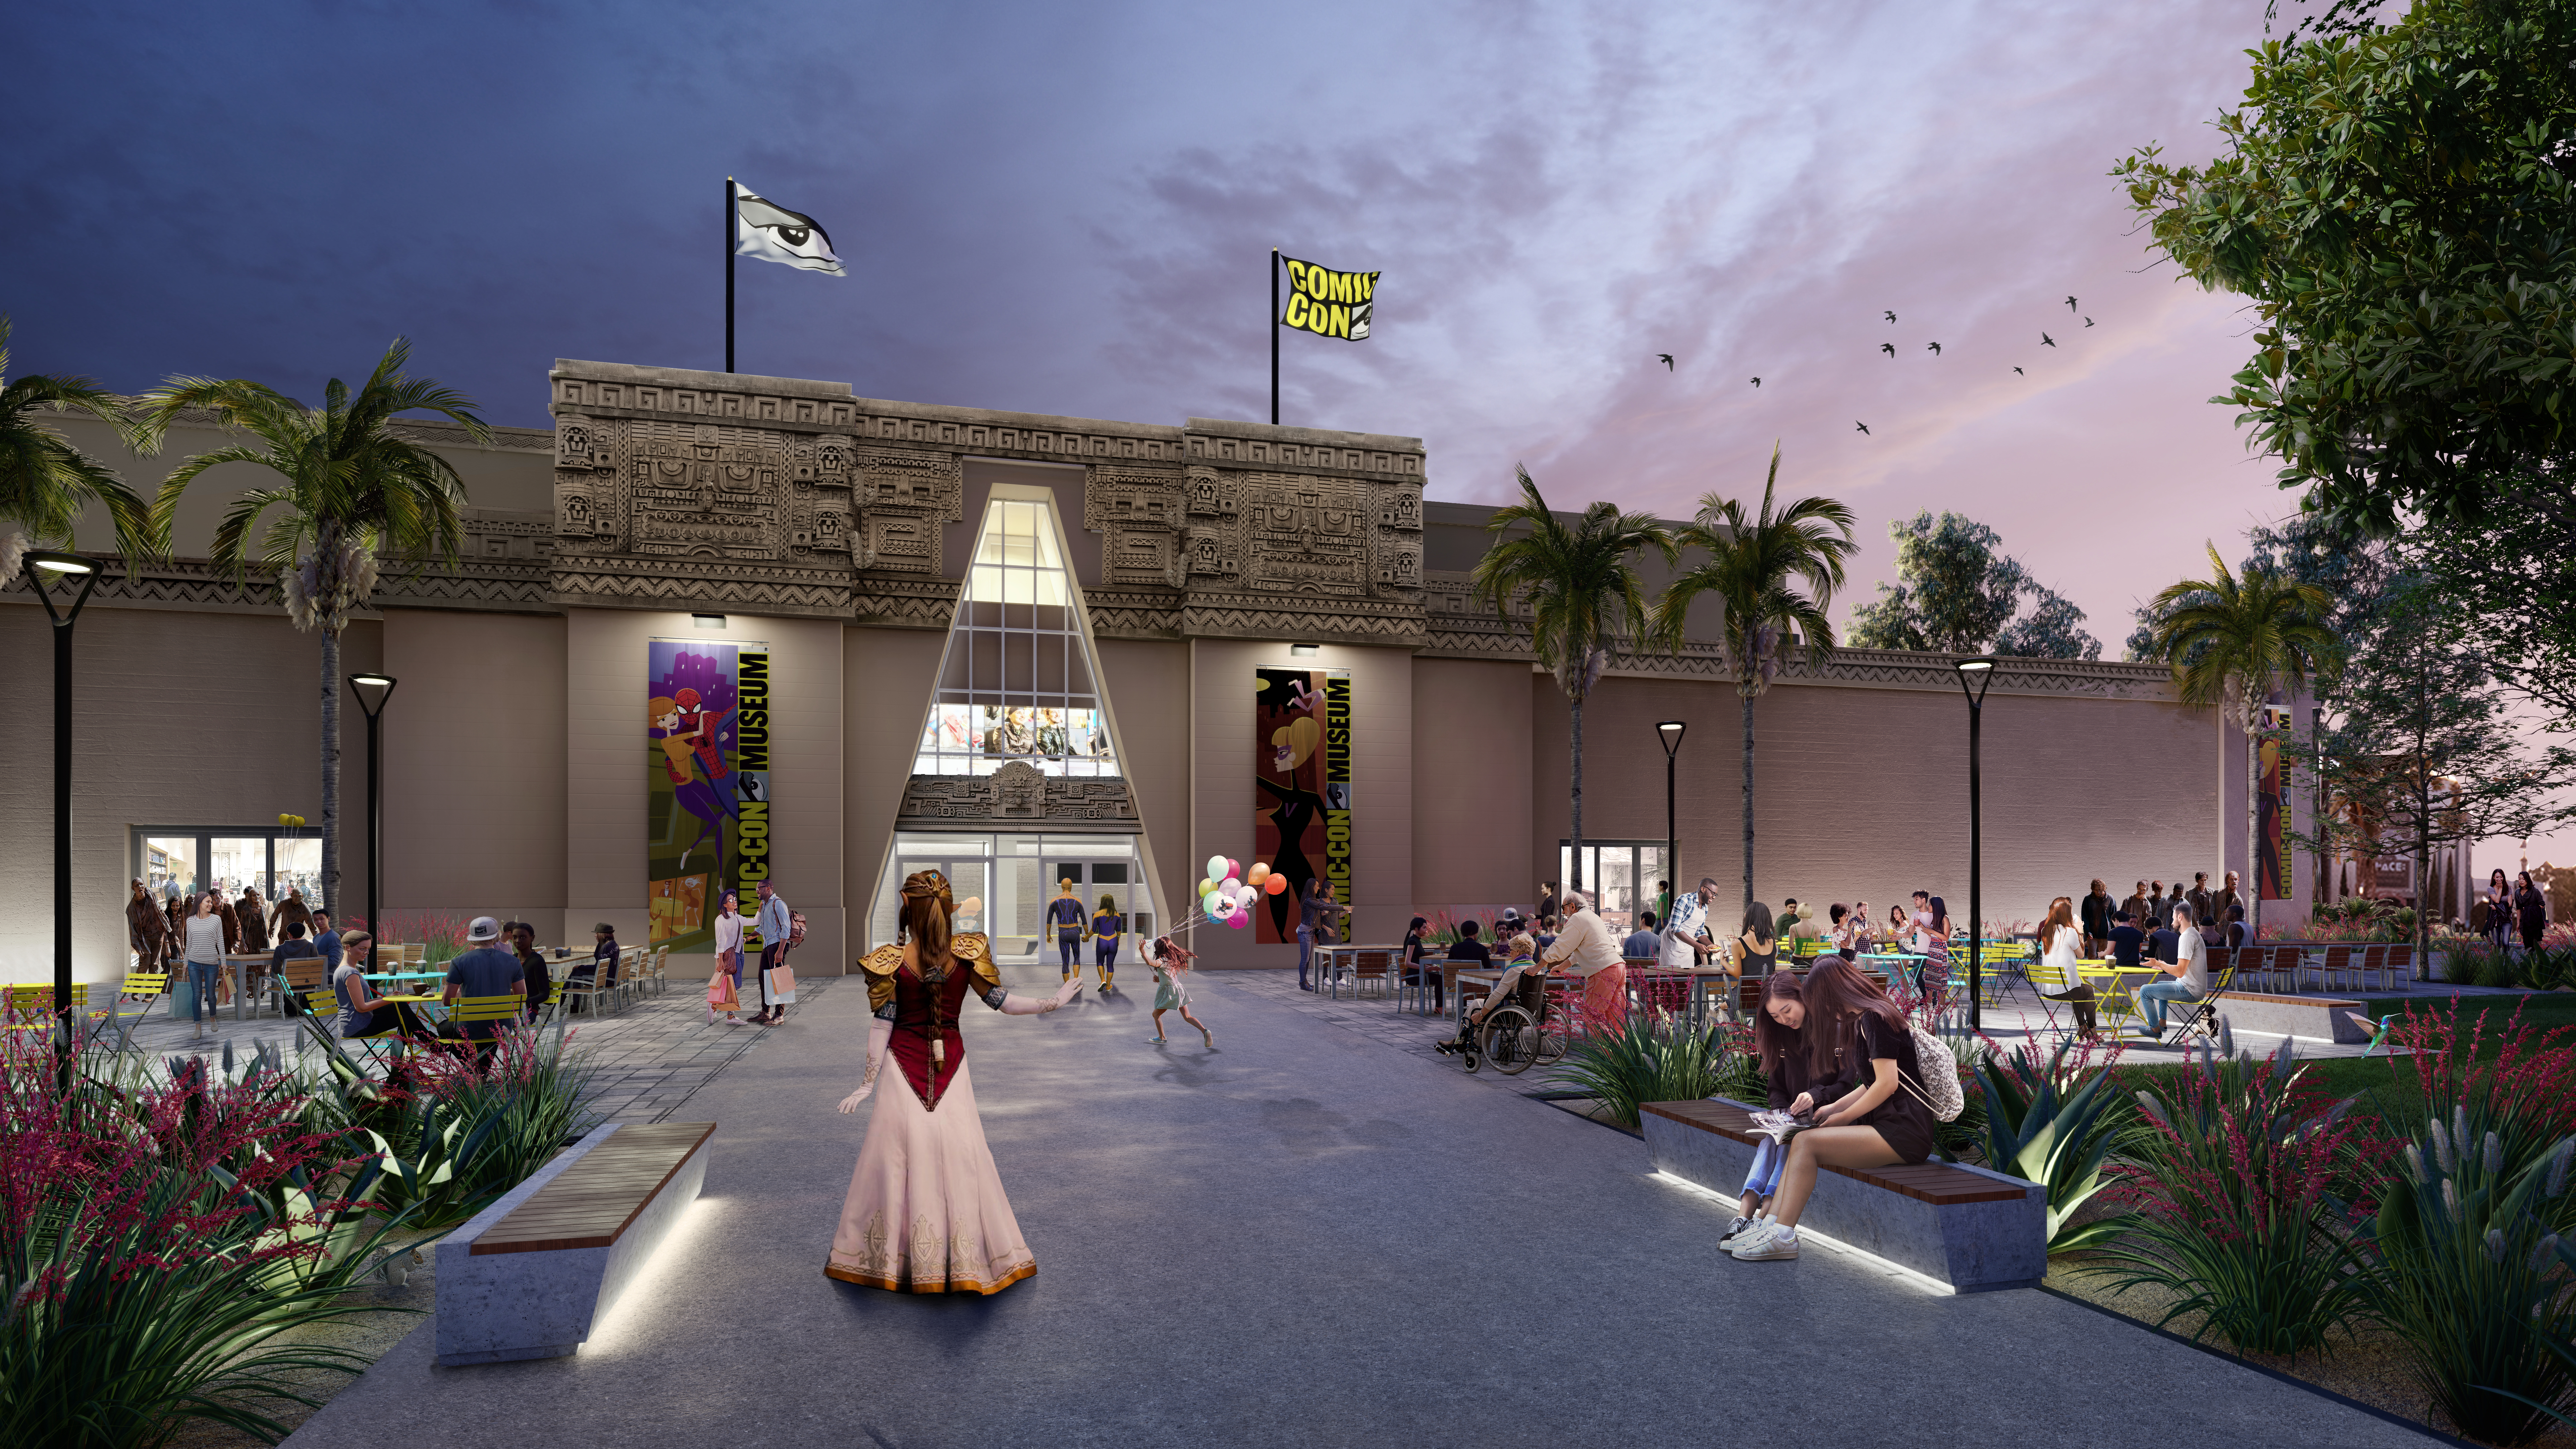 Rendering of the Comic-Con Museum’s exterior. (Photos courtesy of Comic-Con Museum)